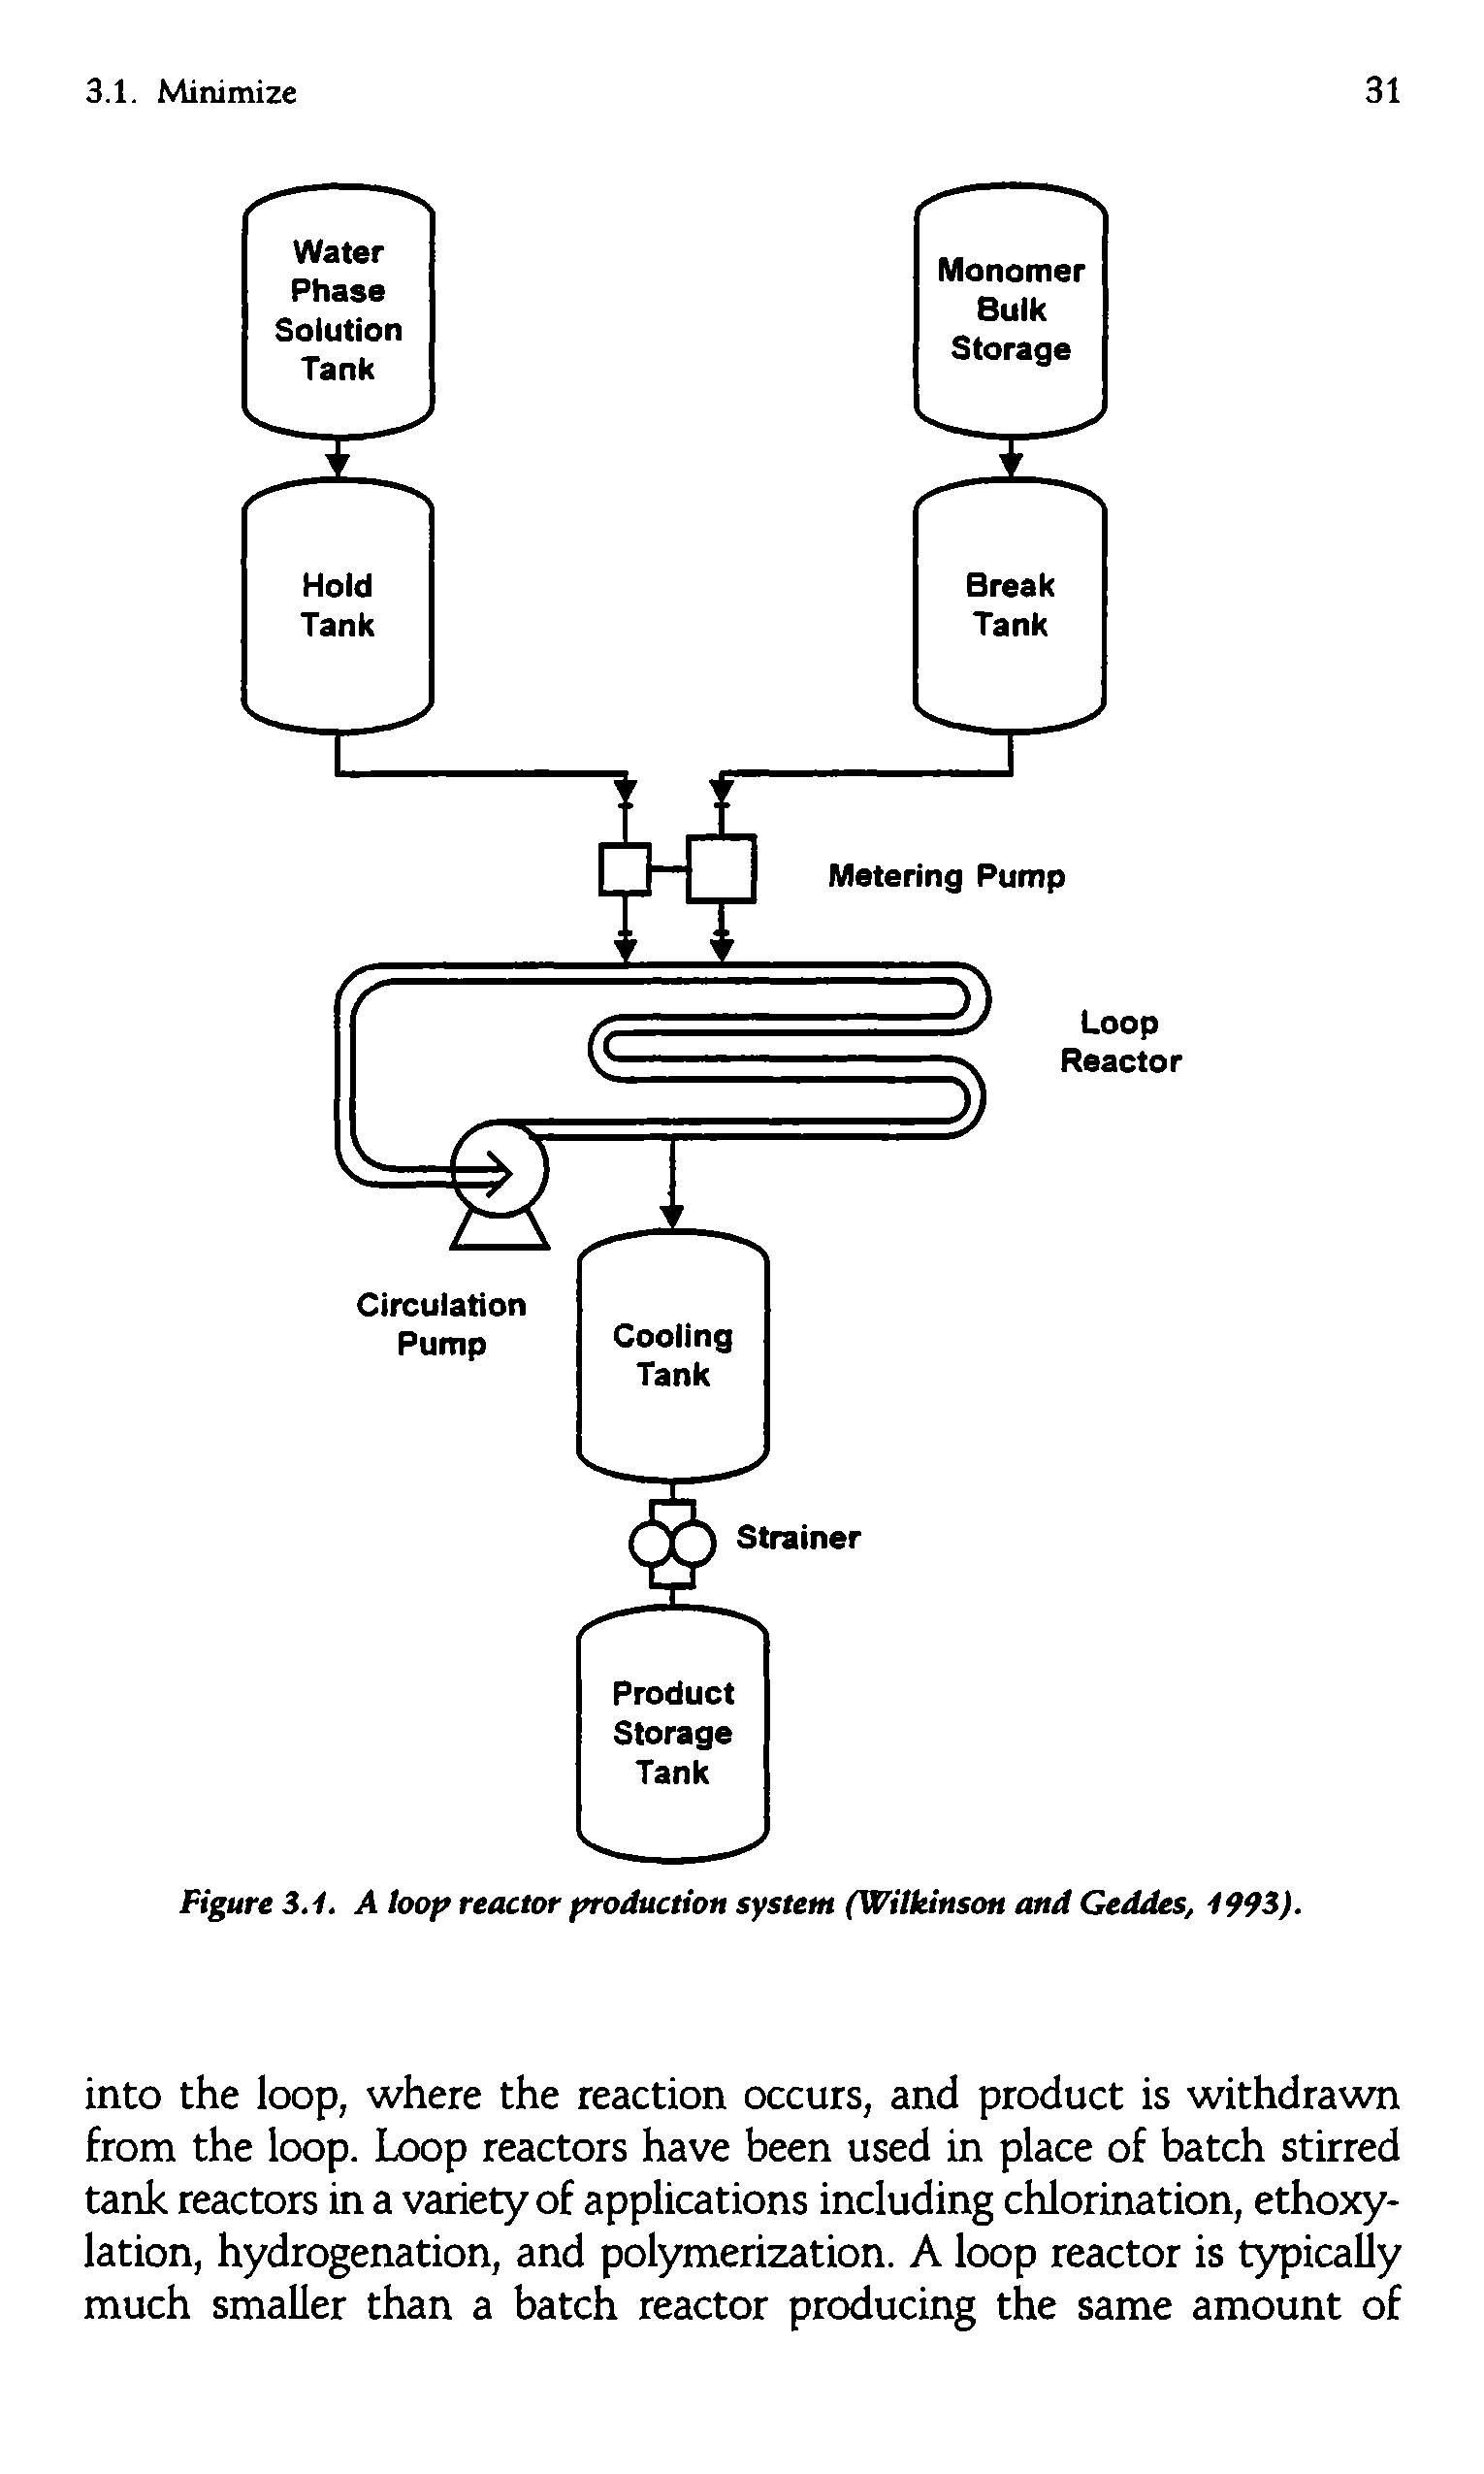 Figure 3.1. A tooff reactor ffroduction system (Wilkinson and Geddes, 1993).